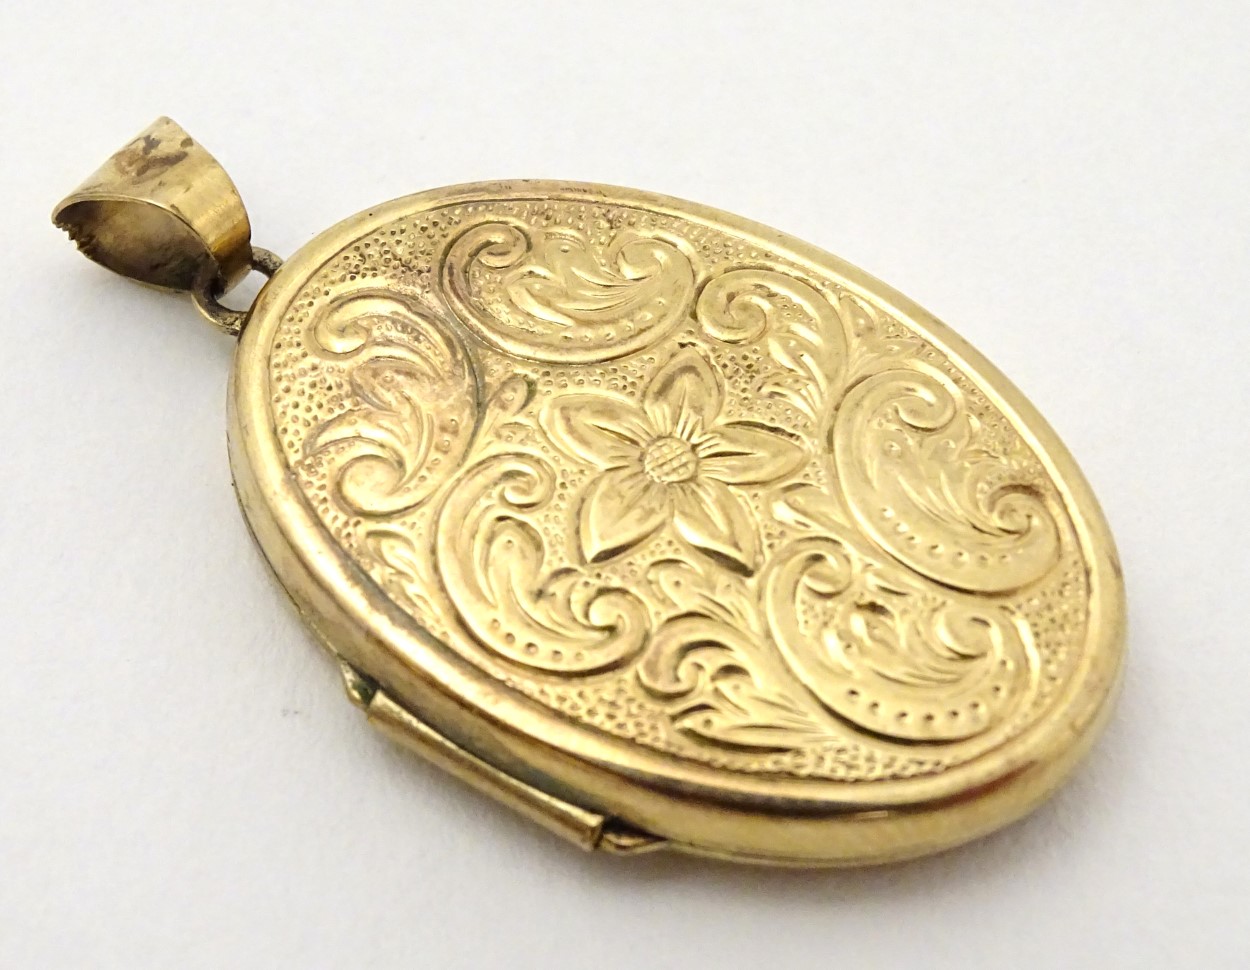 A yellow metal locket of oval form with floral and C-scroll decoration approx 1 1/4" long - Image 5 of 5